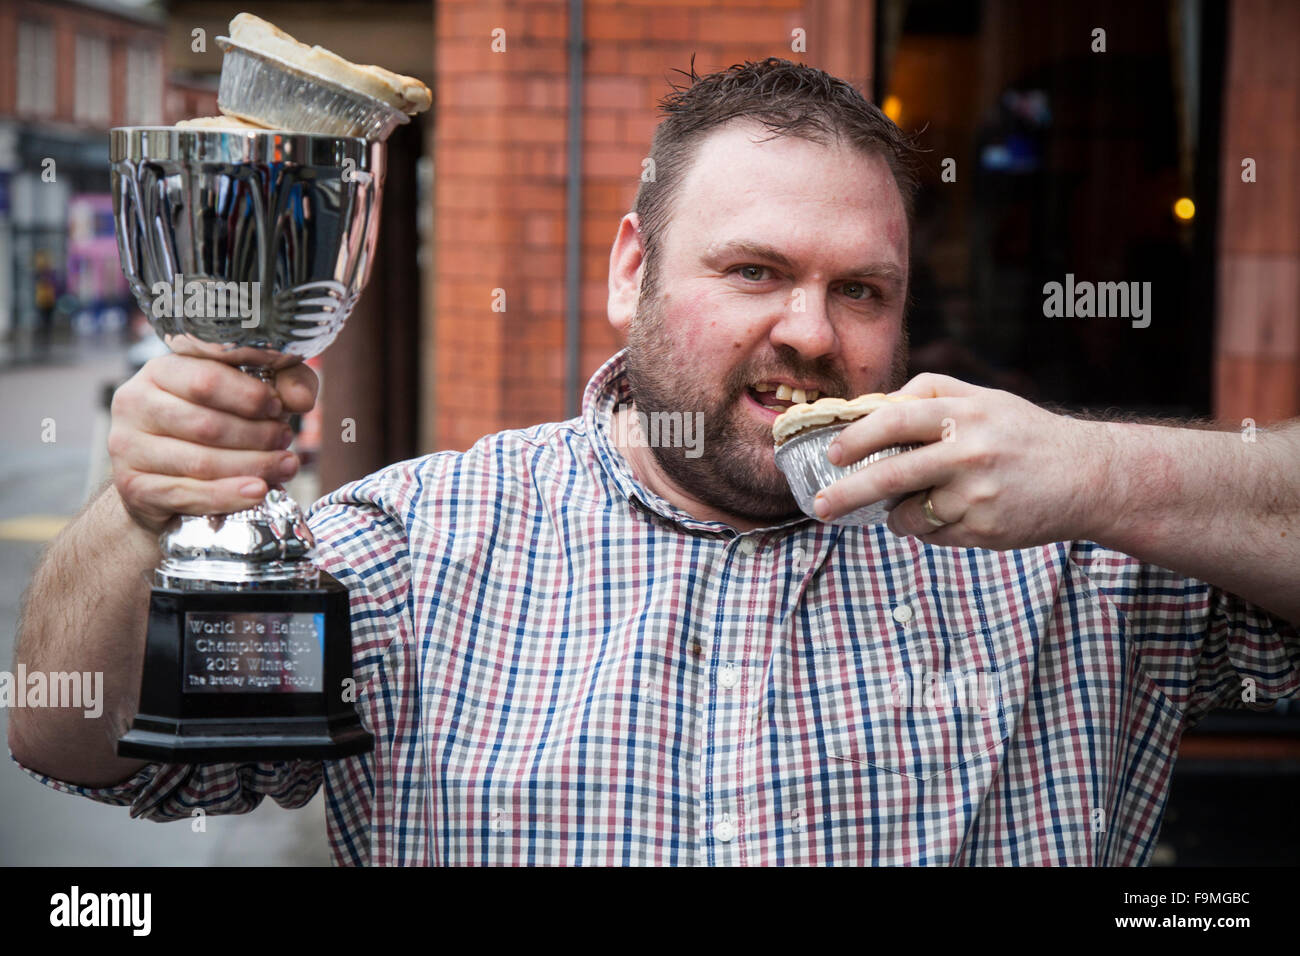 Wigan, UK. 17th December, 2015. The World Pie Eating Championships at Harry’s Bar in Wigan, Wallgate. The winner, Martin Appleton is the person who managed to eat a standard pie fastest.  Martin scored an impressive 38.2 seconds.  The pies are 12cm in diameter and 3.5 cm deep with a beef and potato filling.  The competition, held exactly at Pie Noon saw contestants attempting to consume Wigan’s most famous contribution to cuisine as fast as possible to take home the title of World Champion and lift the Bradley Piggins Trophy. Credit:  Mar Photographics/Alamy Live News Stock Photo